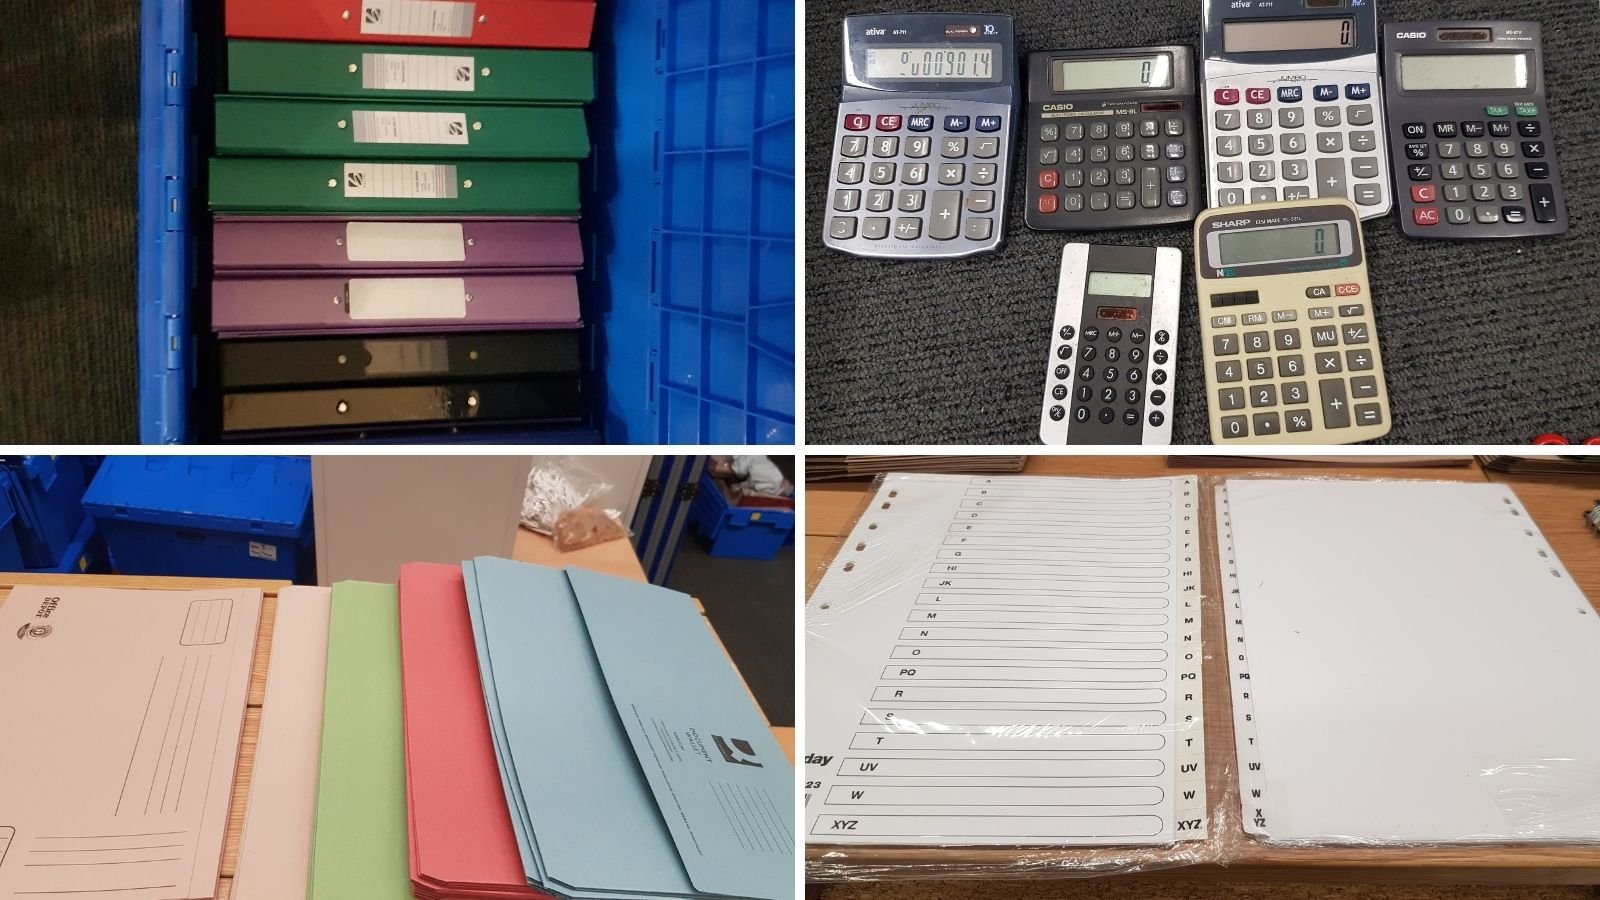 London Metropolitan University unearthed thousands of stationery items 